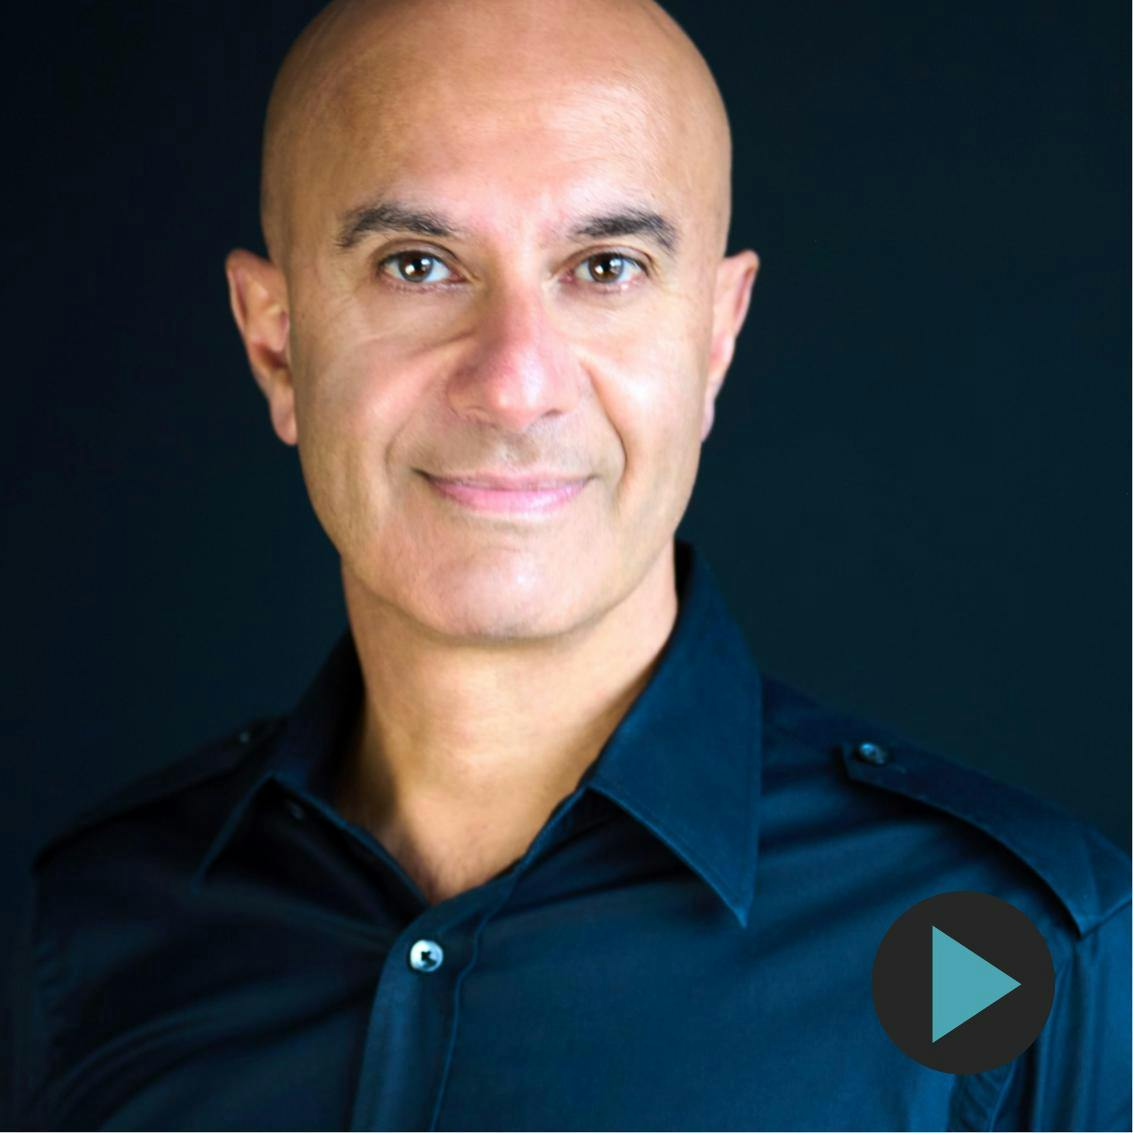 Robin Sharma Meets Ali Abdaal - How to Be Truly Wealthy